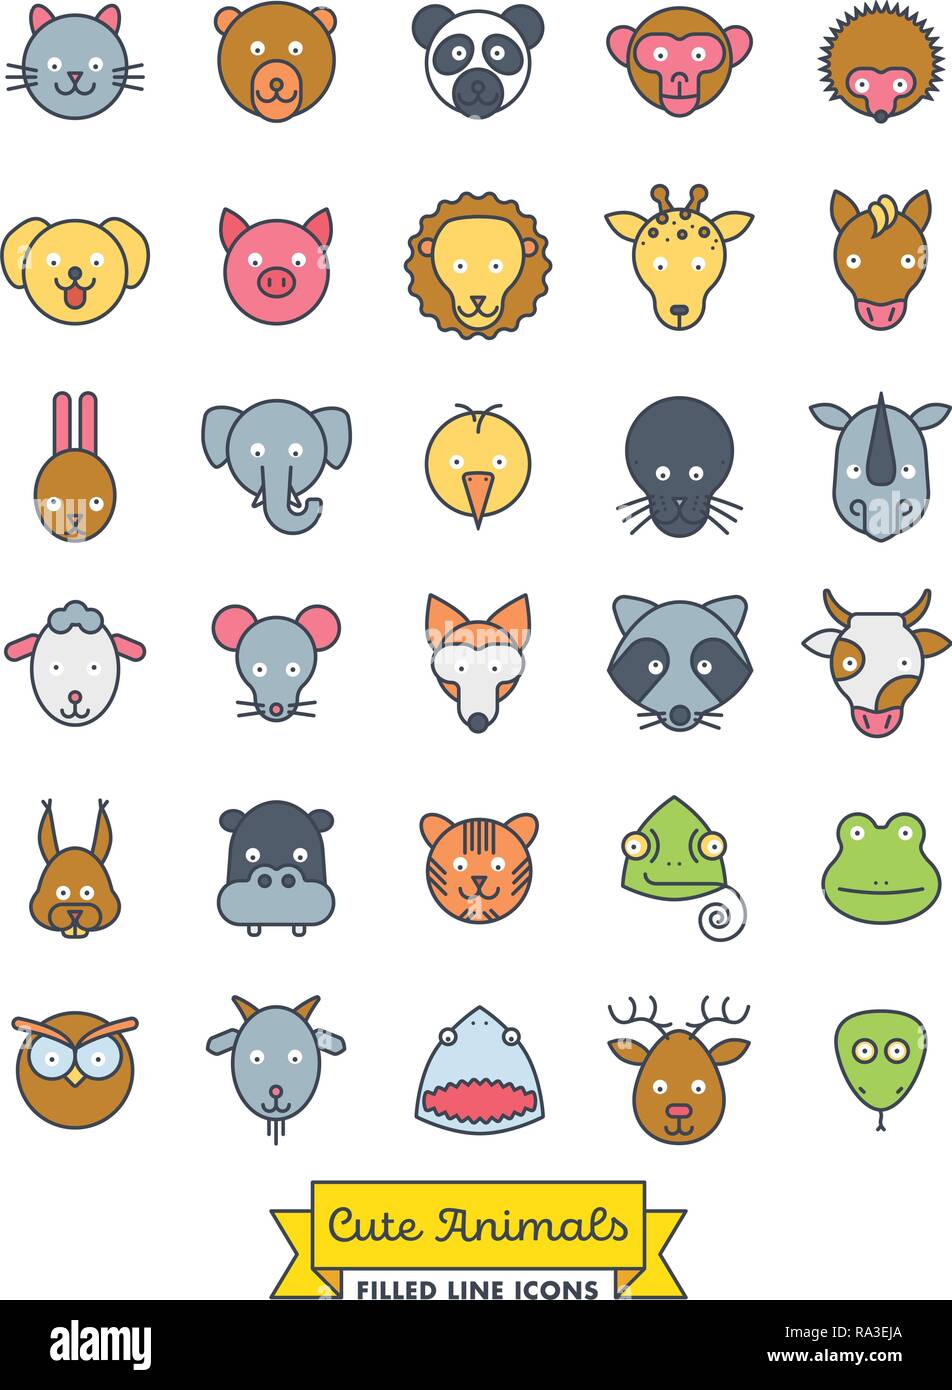 Find the Cutest cute animals symbols to Use on Your Texts